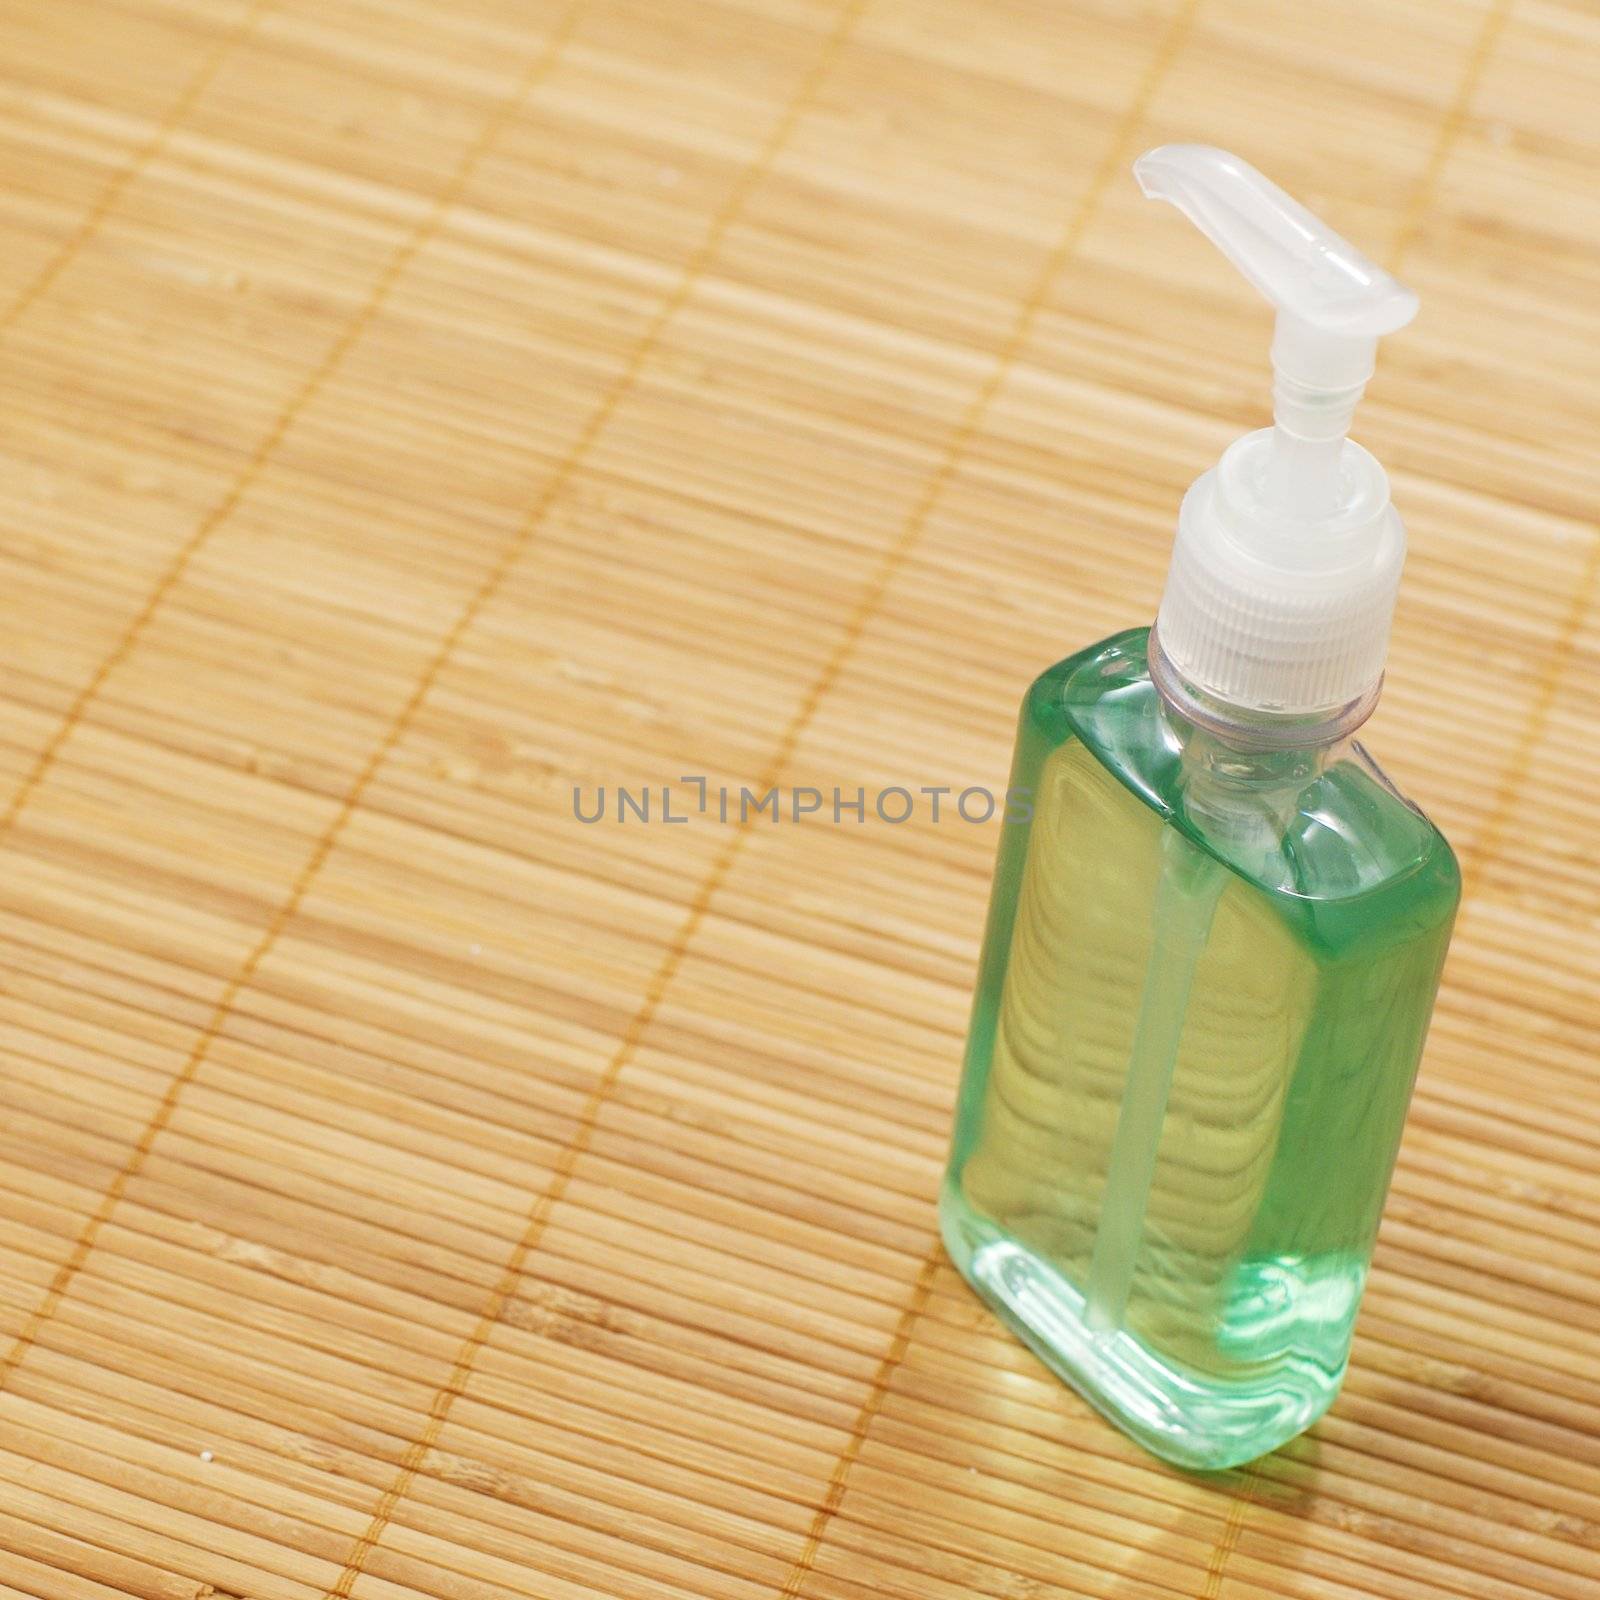 A soap bottle on display against a bamboo mat.